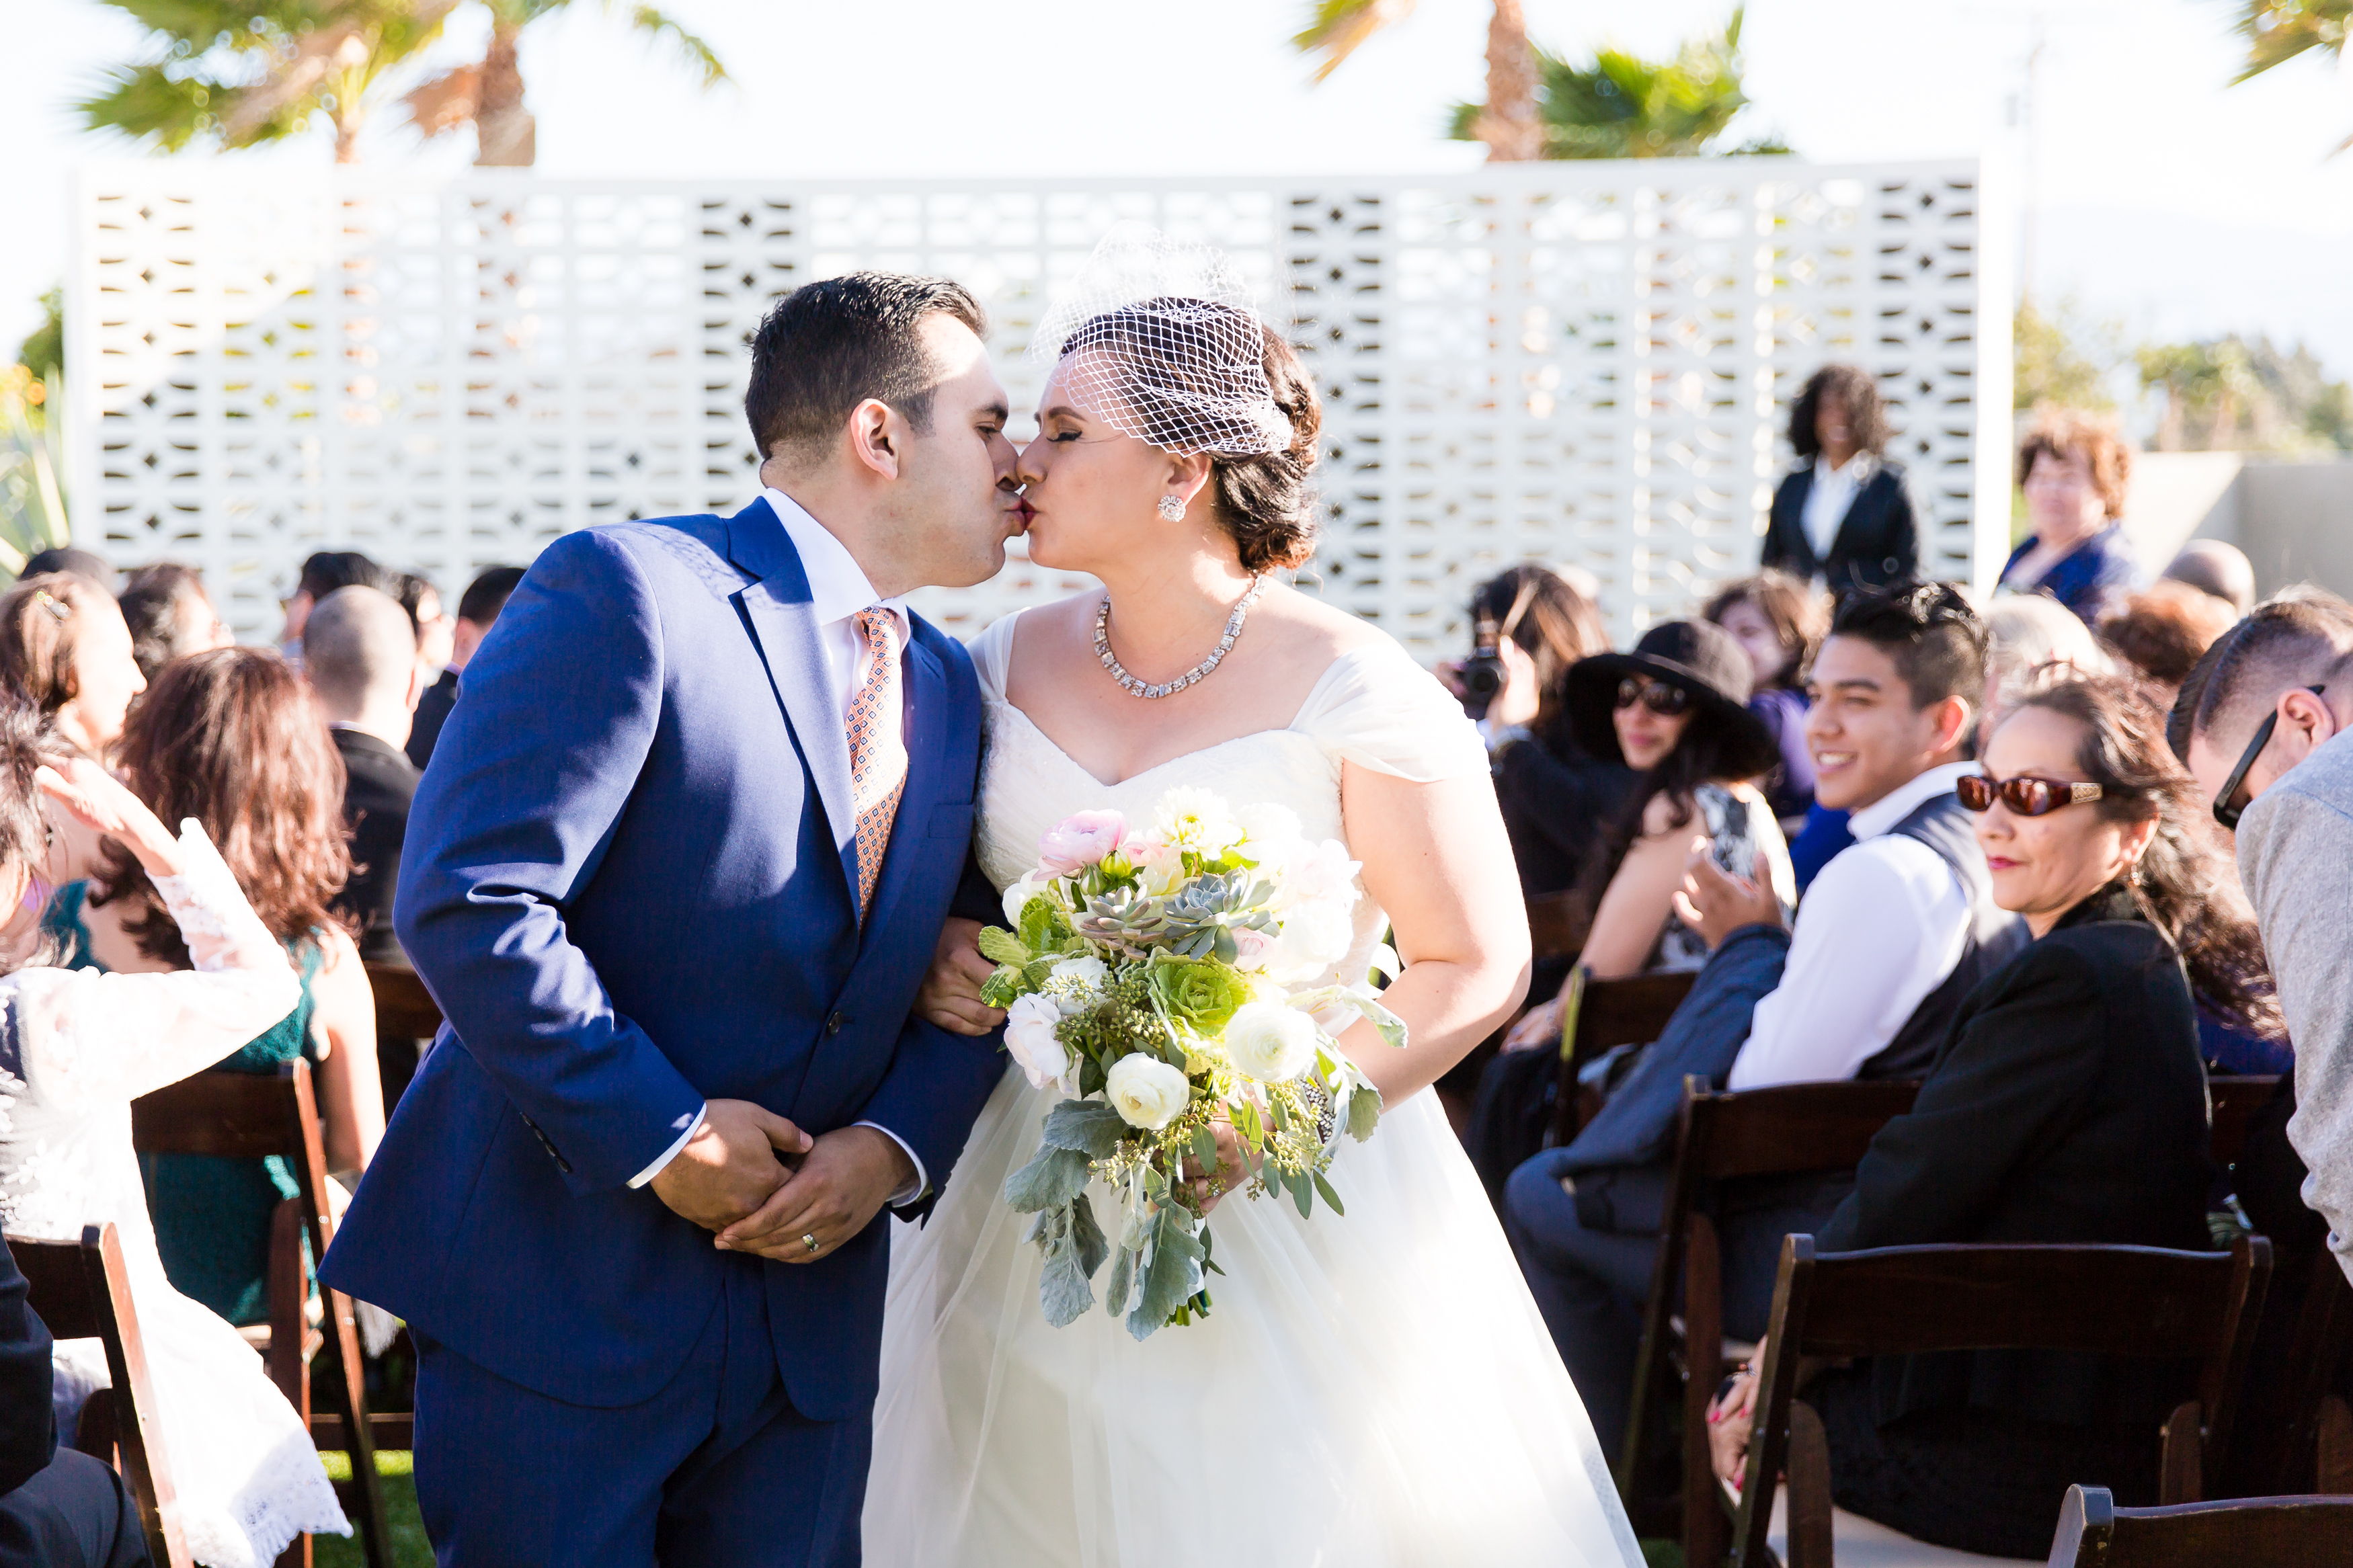 Bride and groom first kiss during wedding ceremony, by Stefani Ciotti